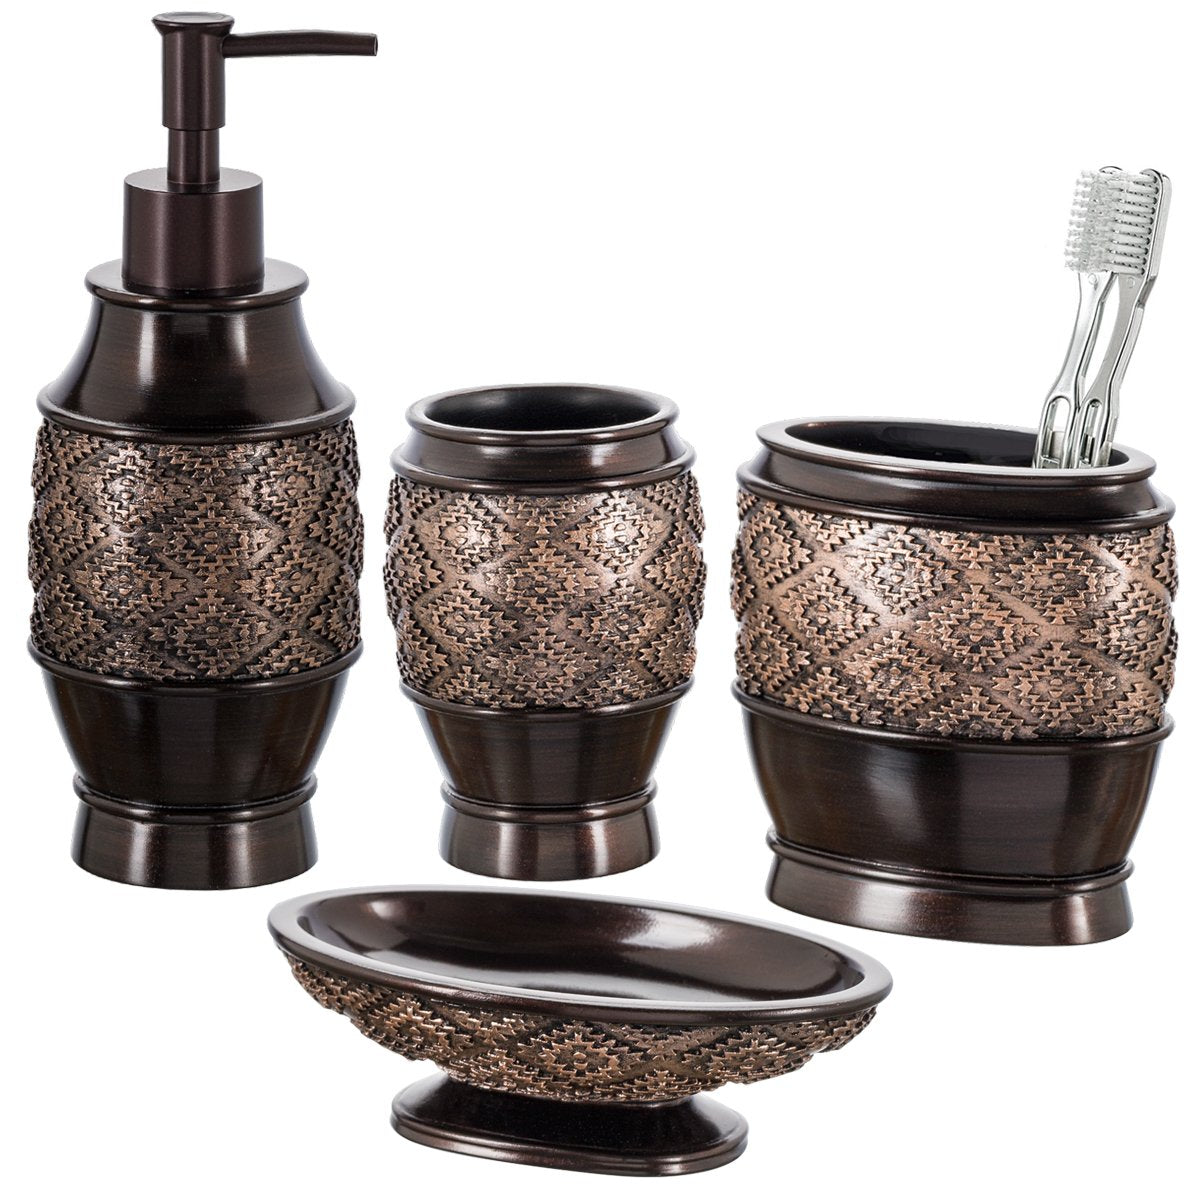 Creative Scents Dublin Bathroom Accessories Set, Bathroom Decor Sets Accessories Includes Soap Dispenser, Bar Soap Dish, Tumbler, and Toothbrush Holder for Your Vanity Countertop (Brown)  - Like New